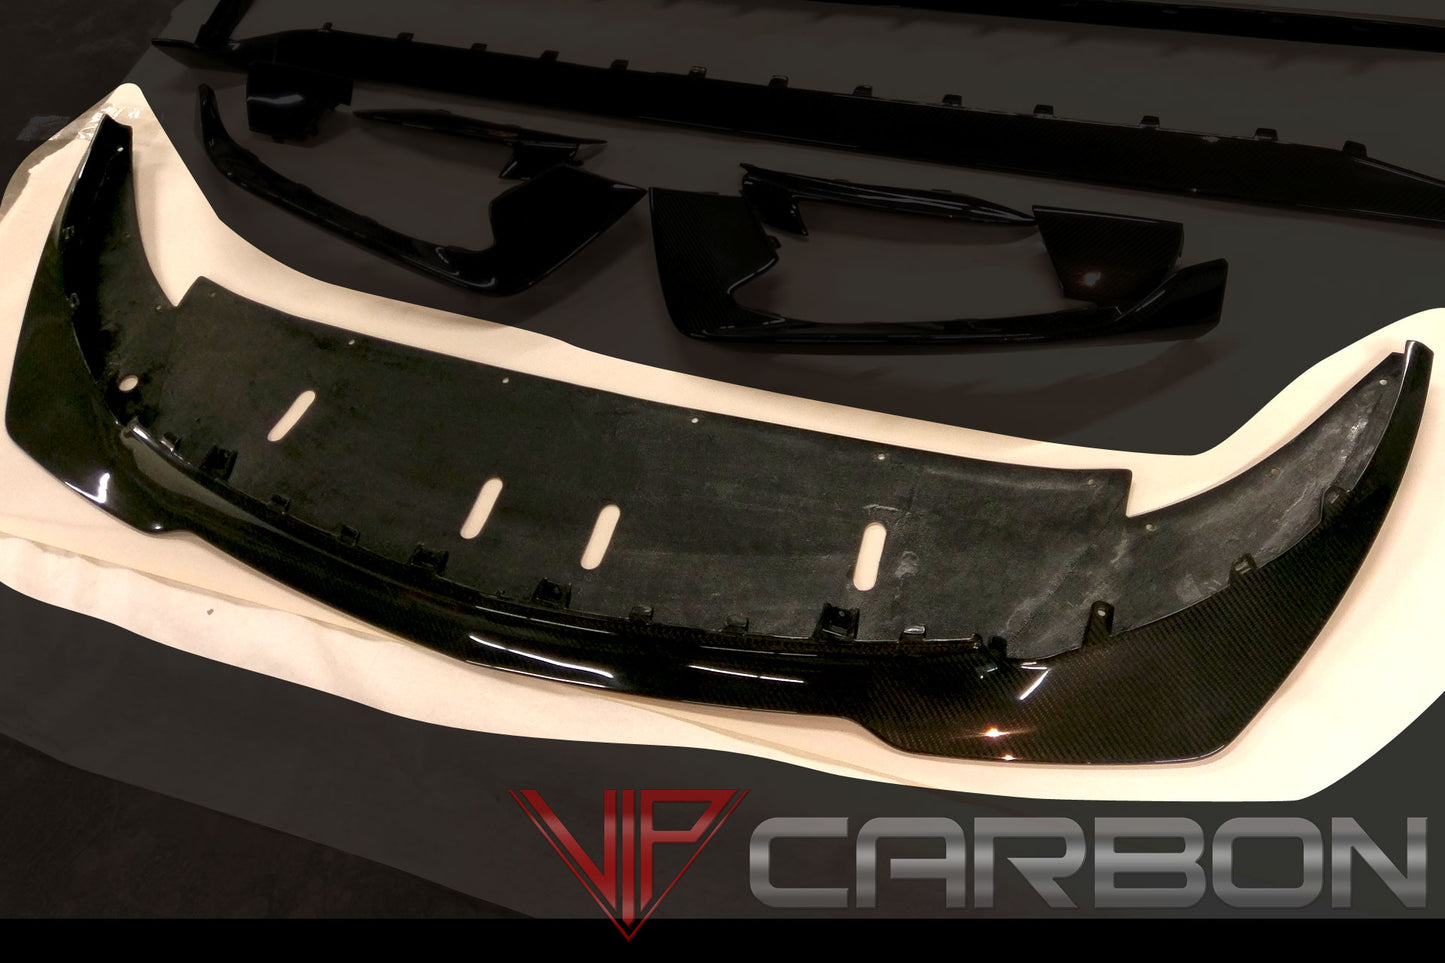 Carbon Fiber GT350 "R" Front Splitter Ford Mustang Shelby 2015-2018 by California Super Coupes